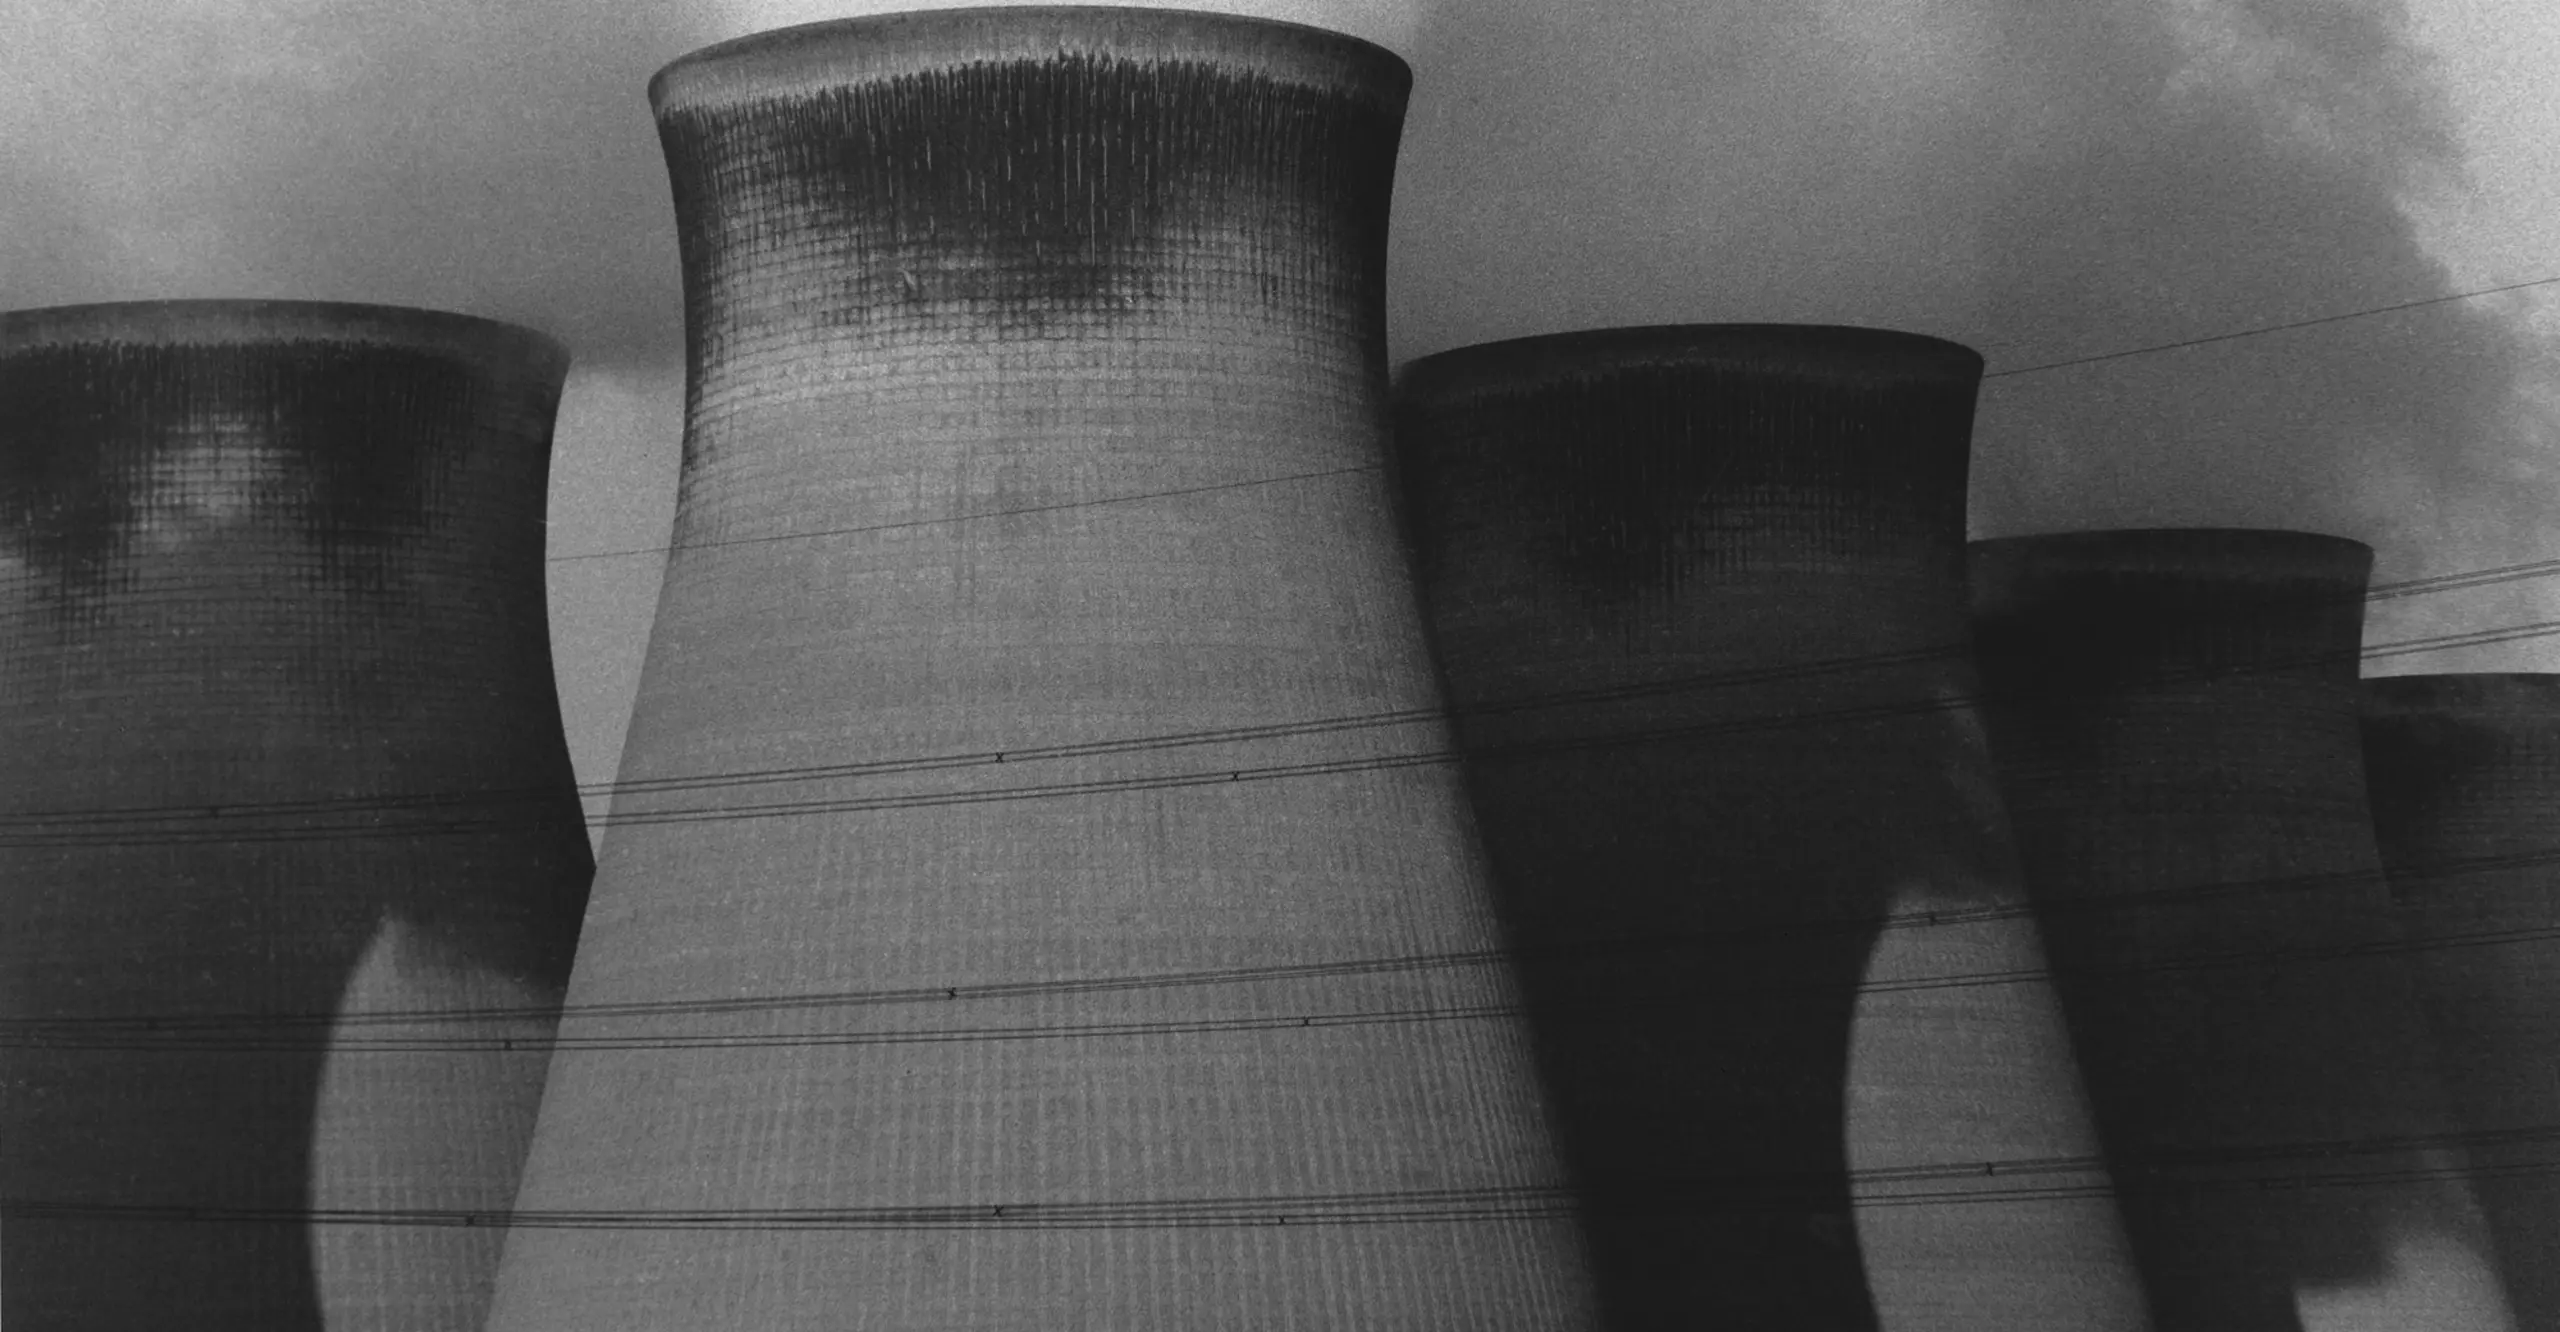 David Lynch, Untitled (England), late 1980s early 1990s